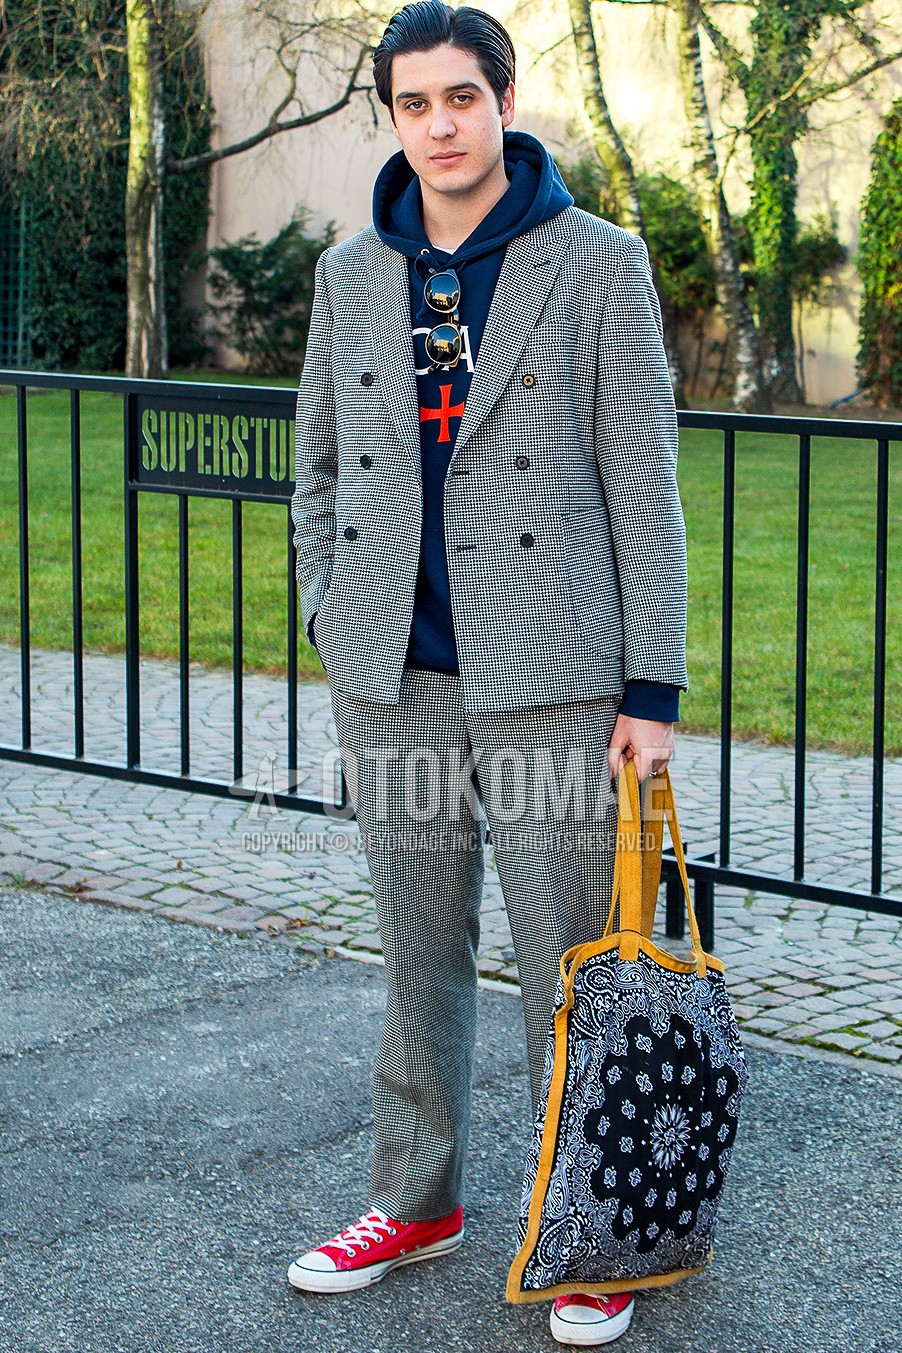 Men's autumn winter outfit with navy plain hoodie, red low-cut sneakers, paisley tote bag, gray plain suit.